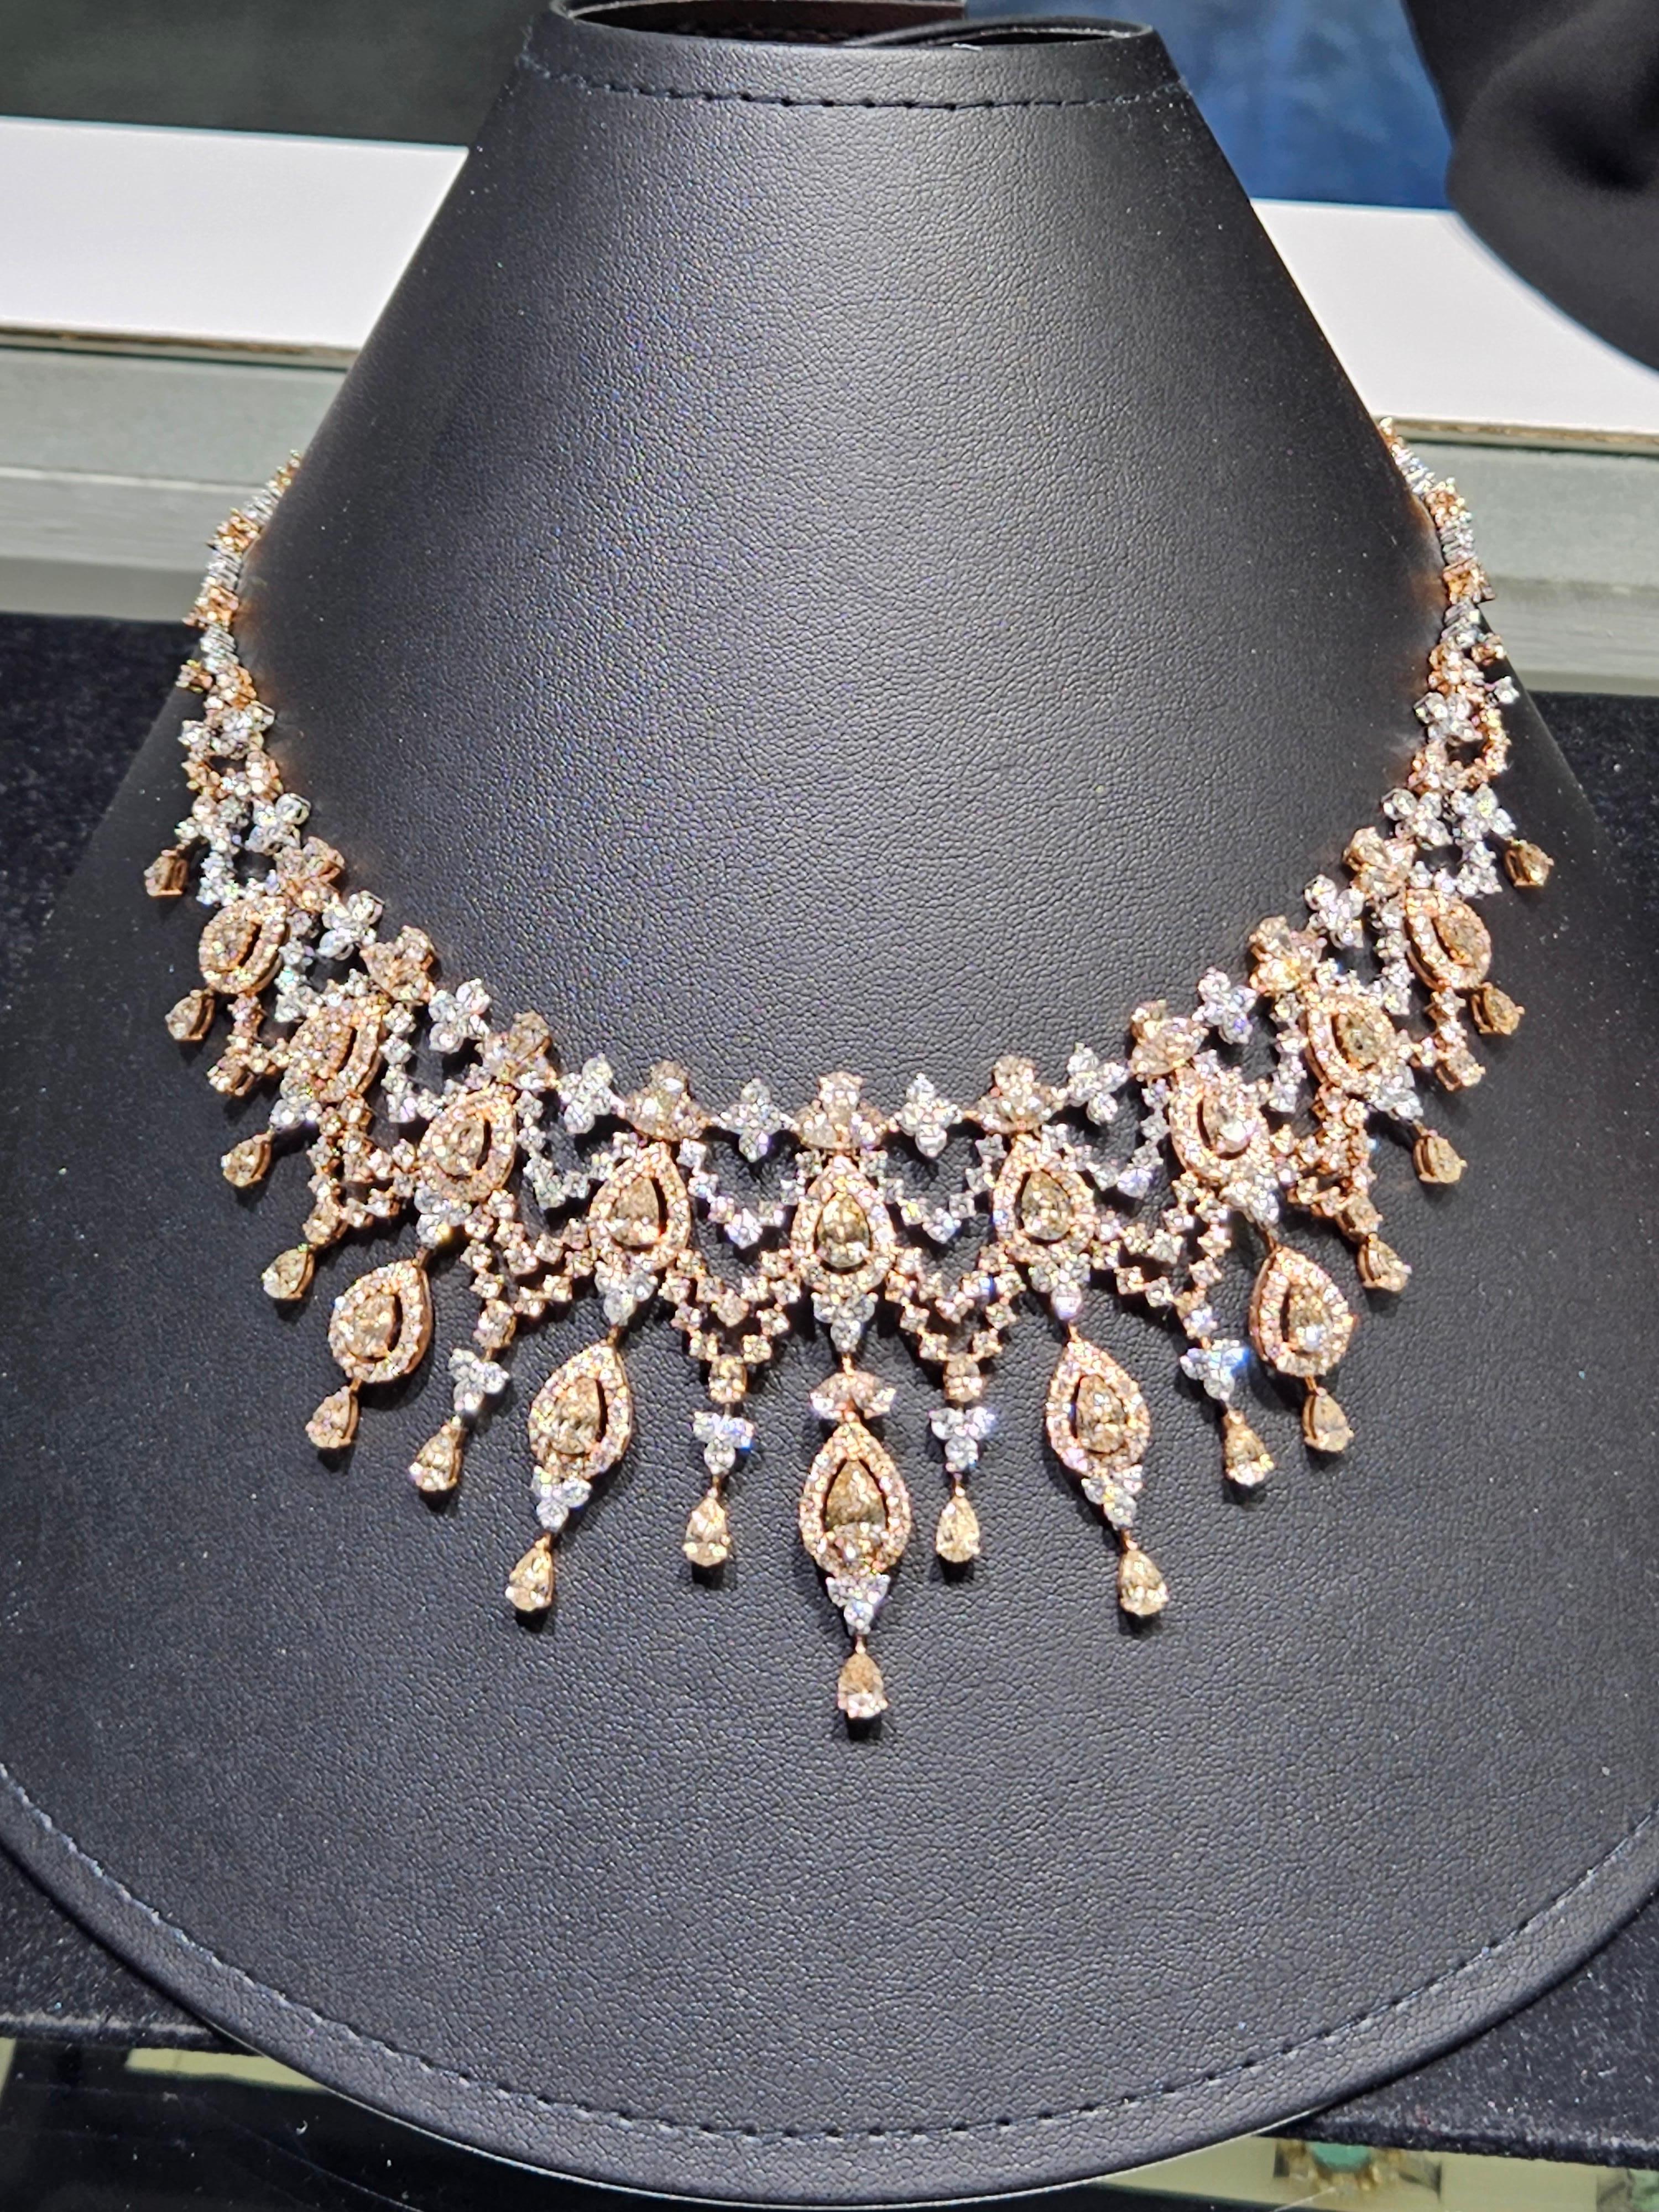 The Following Item we are offering is this Extremely Rare Beautiful 18KT Gold Fine Rare Large Fancy Yellow and Champagne Diamonds and White Diamonds Elaborate Masterpiece of a Necklace. This Magnificent Necklace is comprised of Rare Fine Large